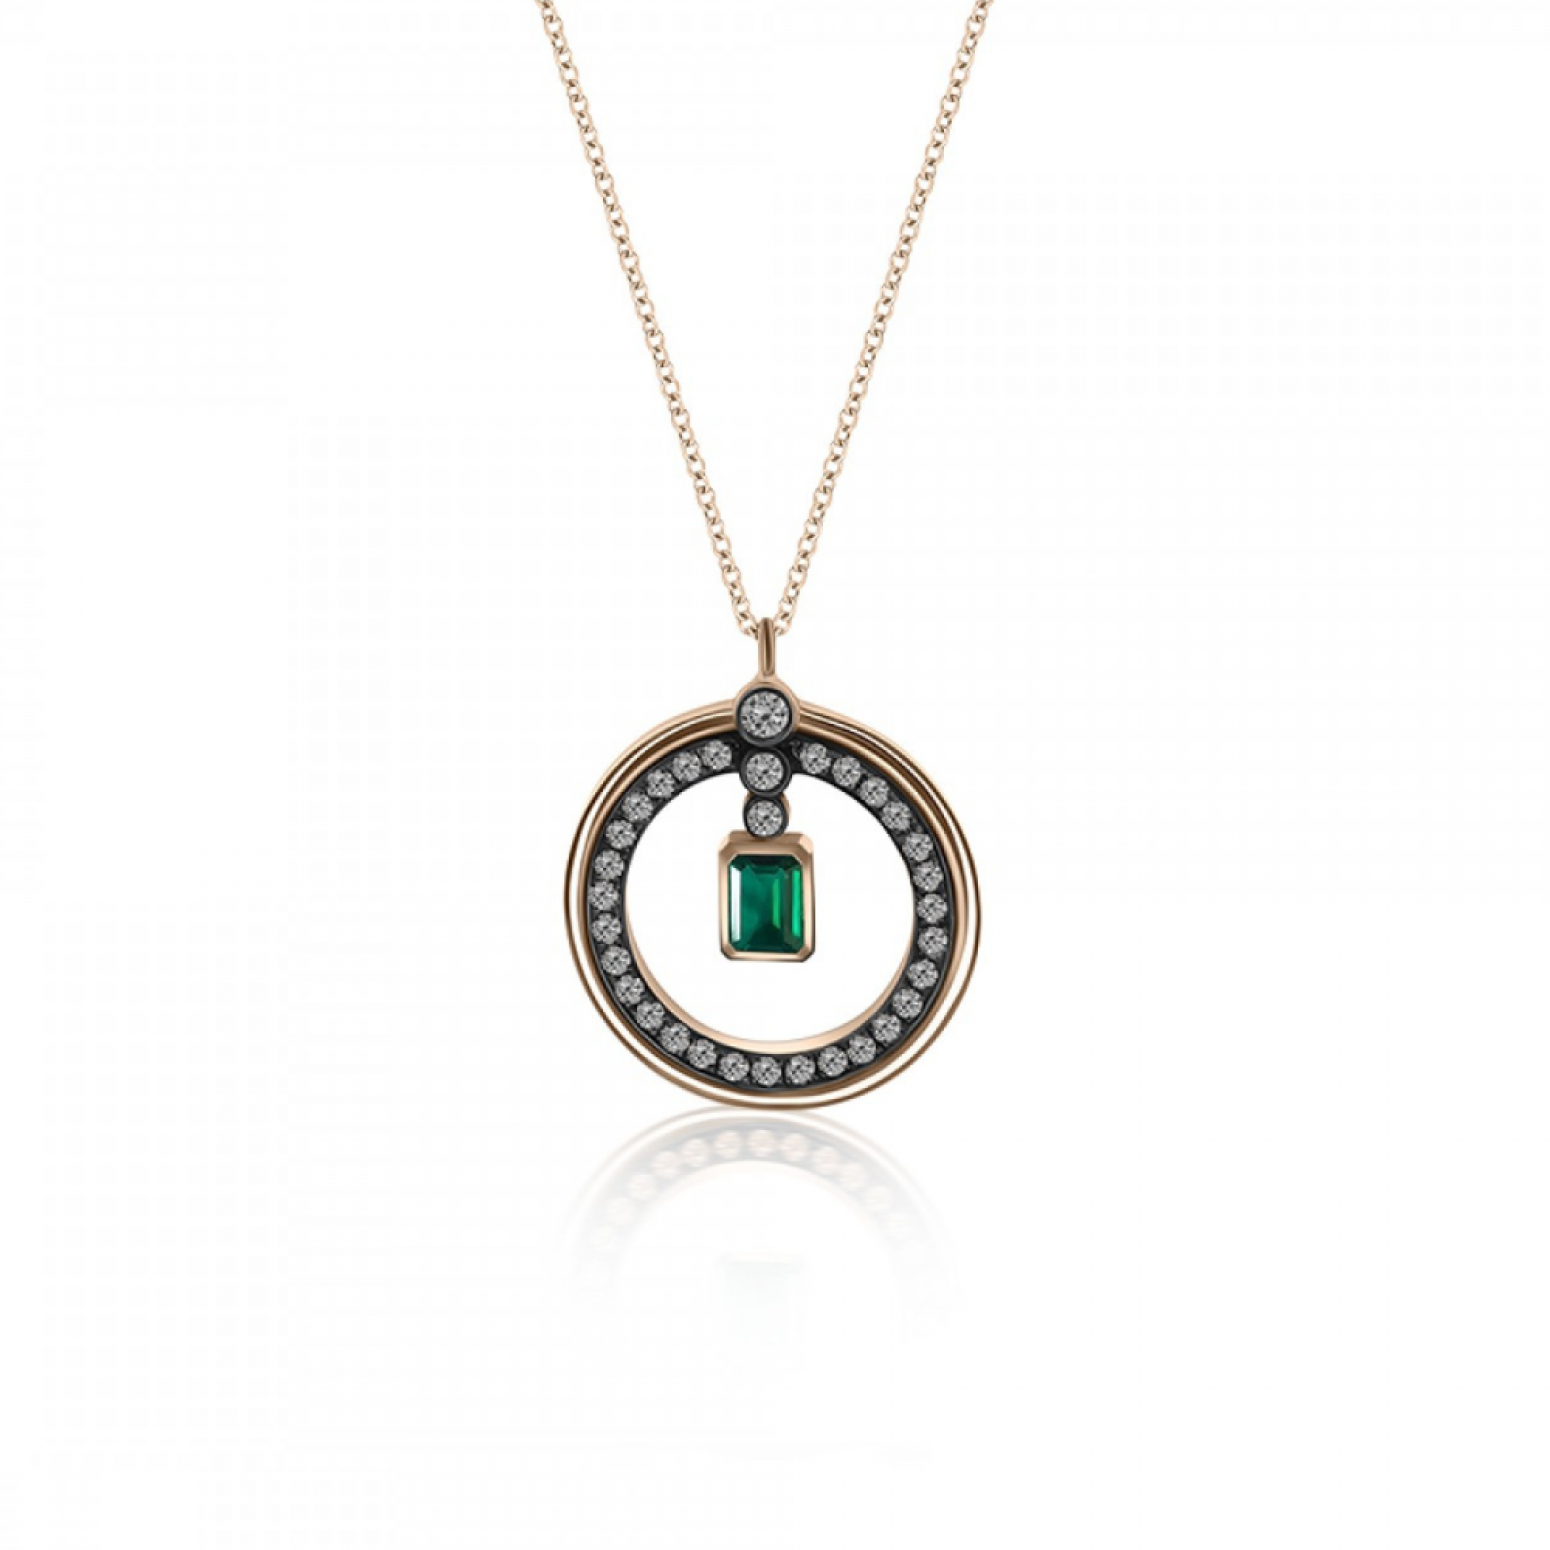 Round necklace, Κ18 pink gold with brown, white diamonds 0.30ct, VS1, H and emerald 0.24ct, ko4522 NECKLACES Κοσμηματα - chrilia.gr